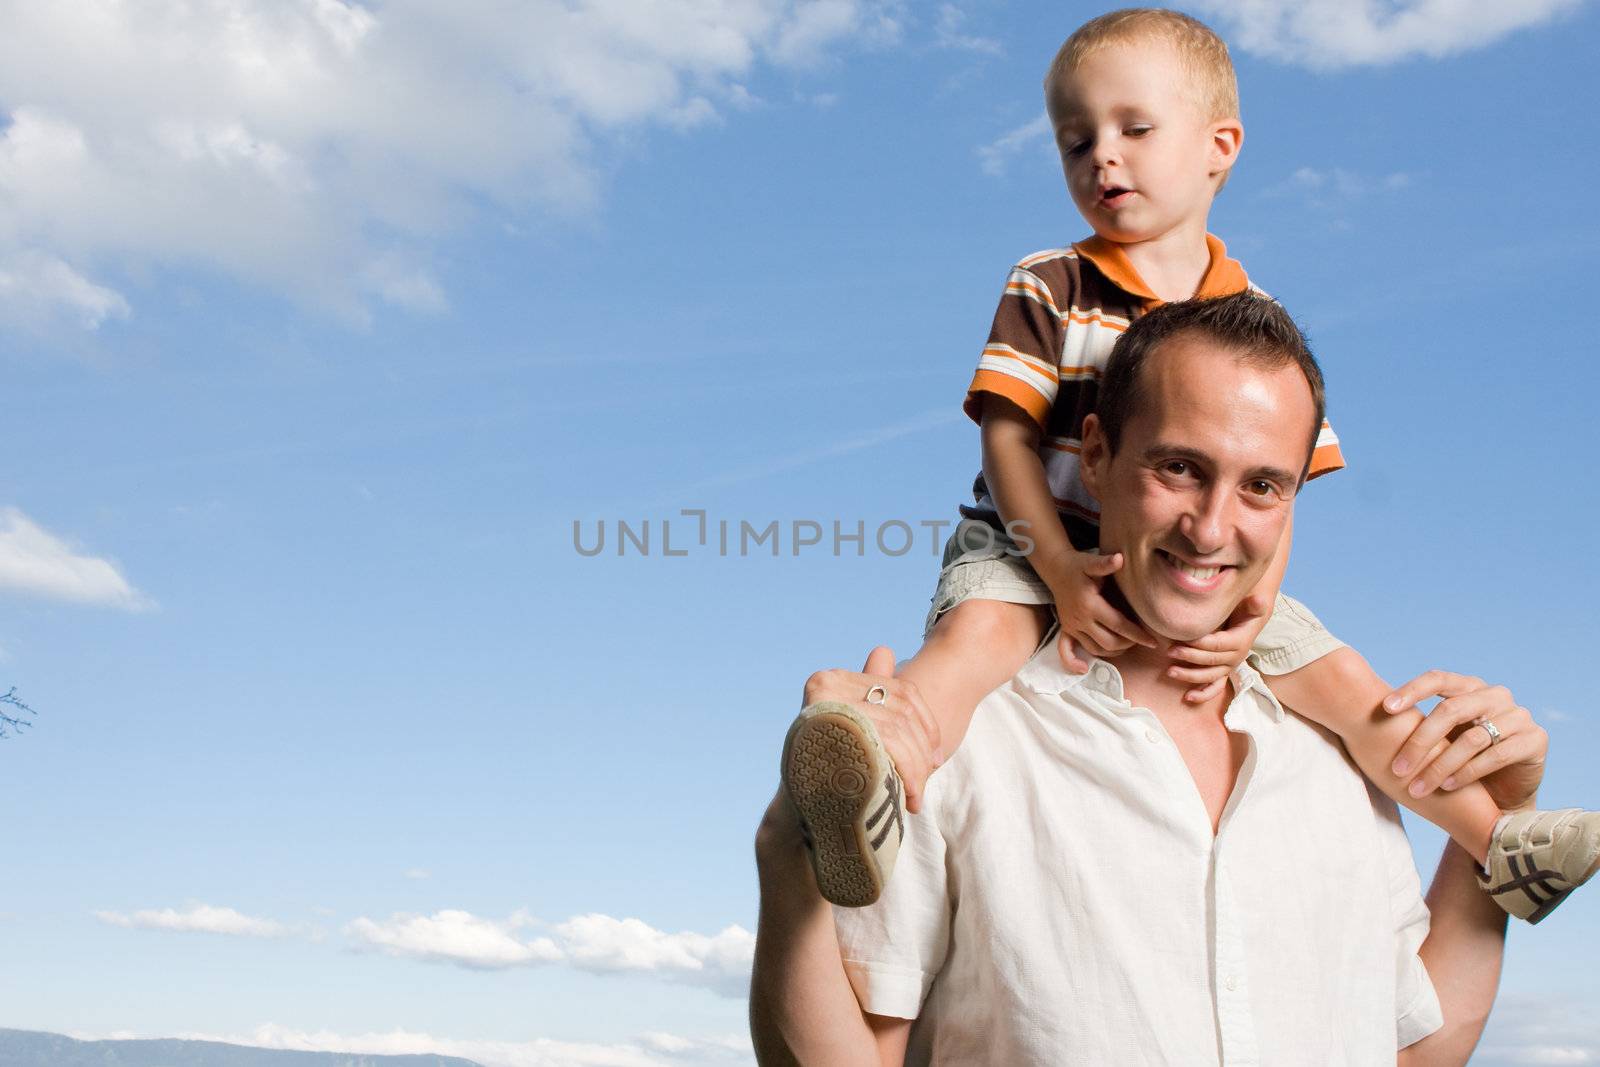 Father carrying his son on piggy back ride outdoors against nature and blue sky